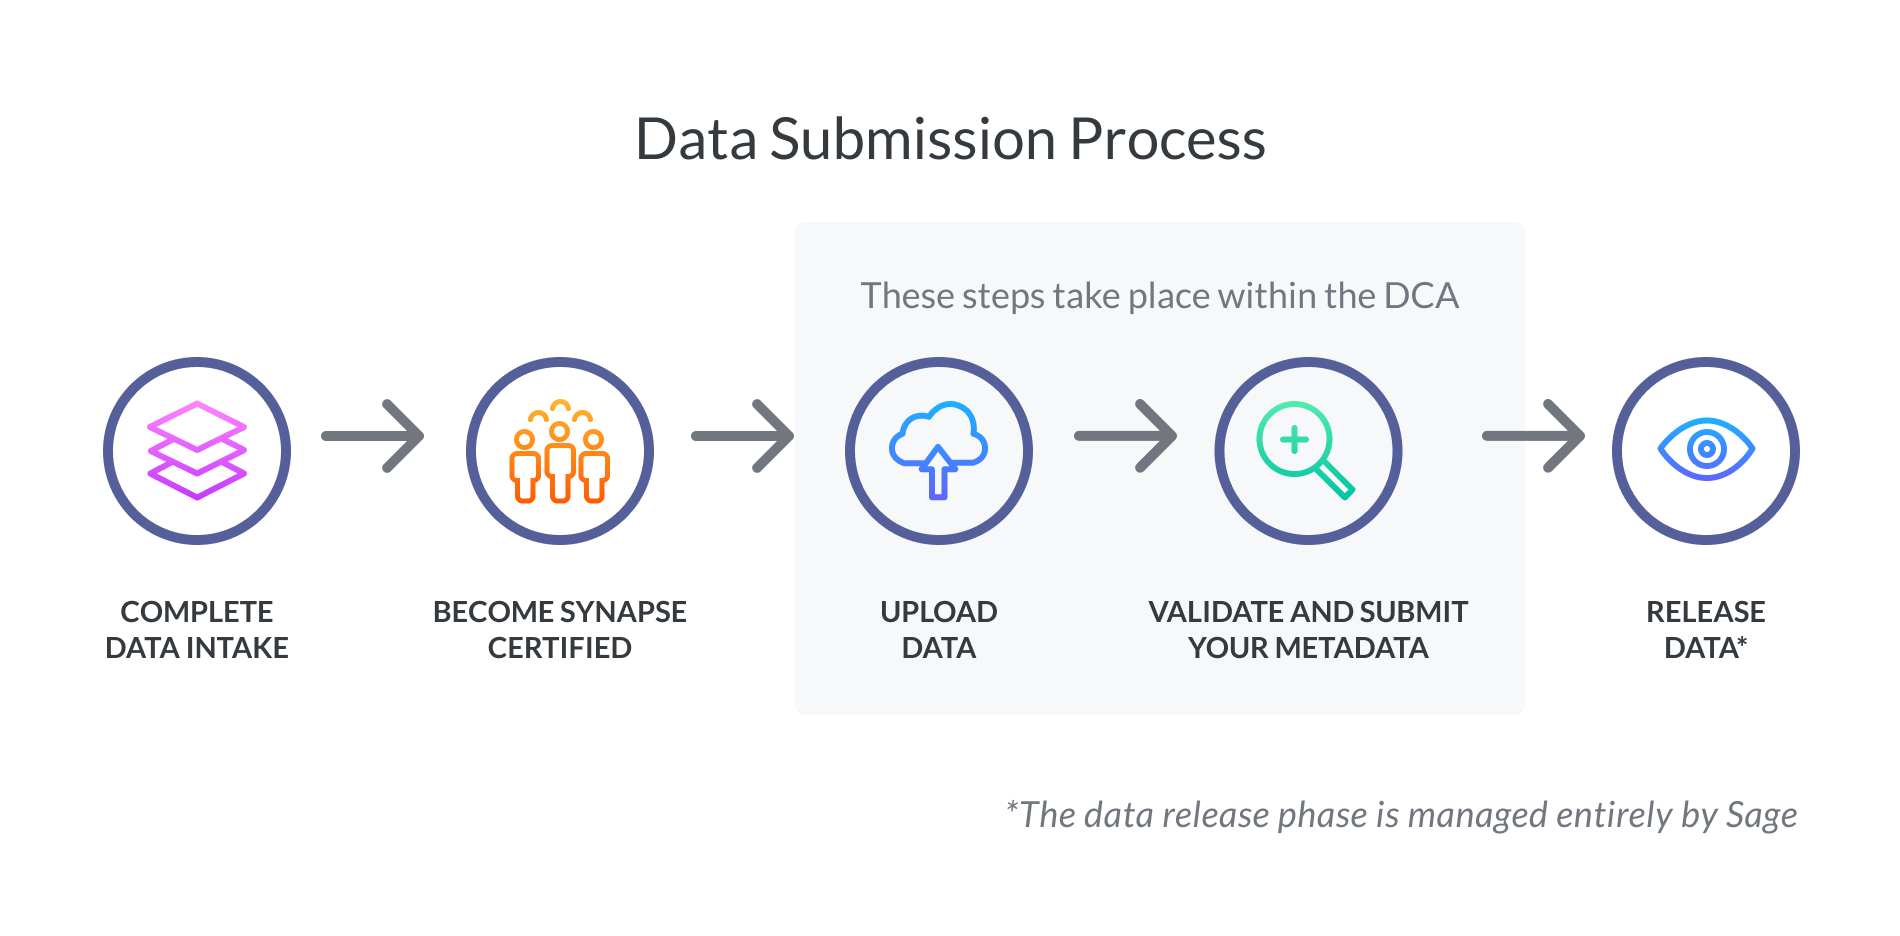 data submission process, complete data intake, become synapse certified, upload data, validate and submit your metadata, release data. The data release is managed entirely by Sage.